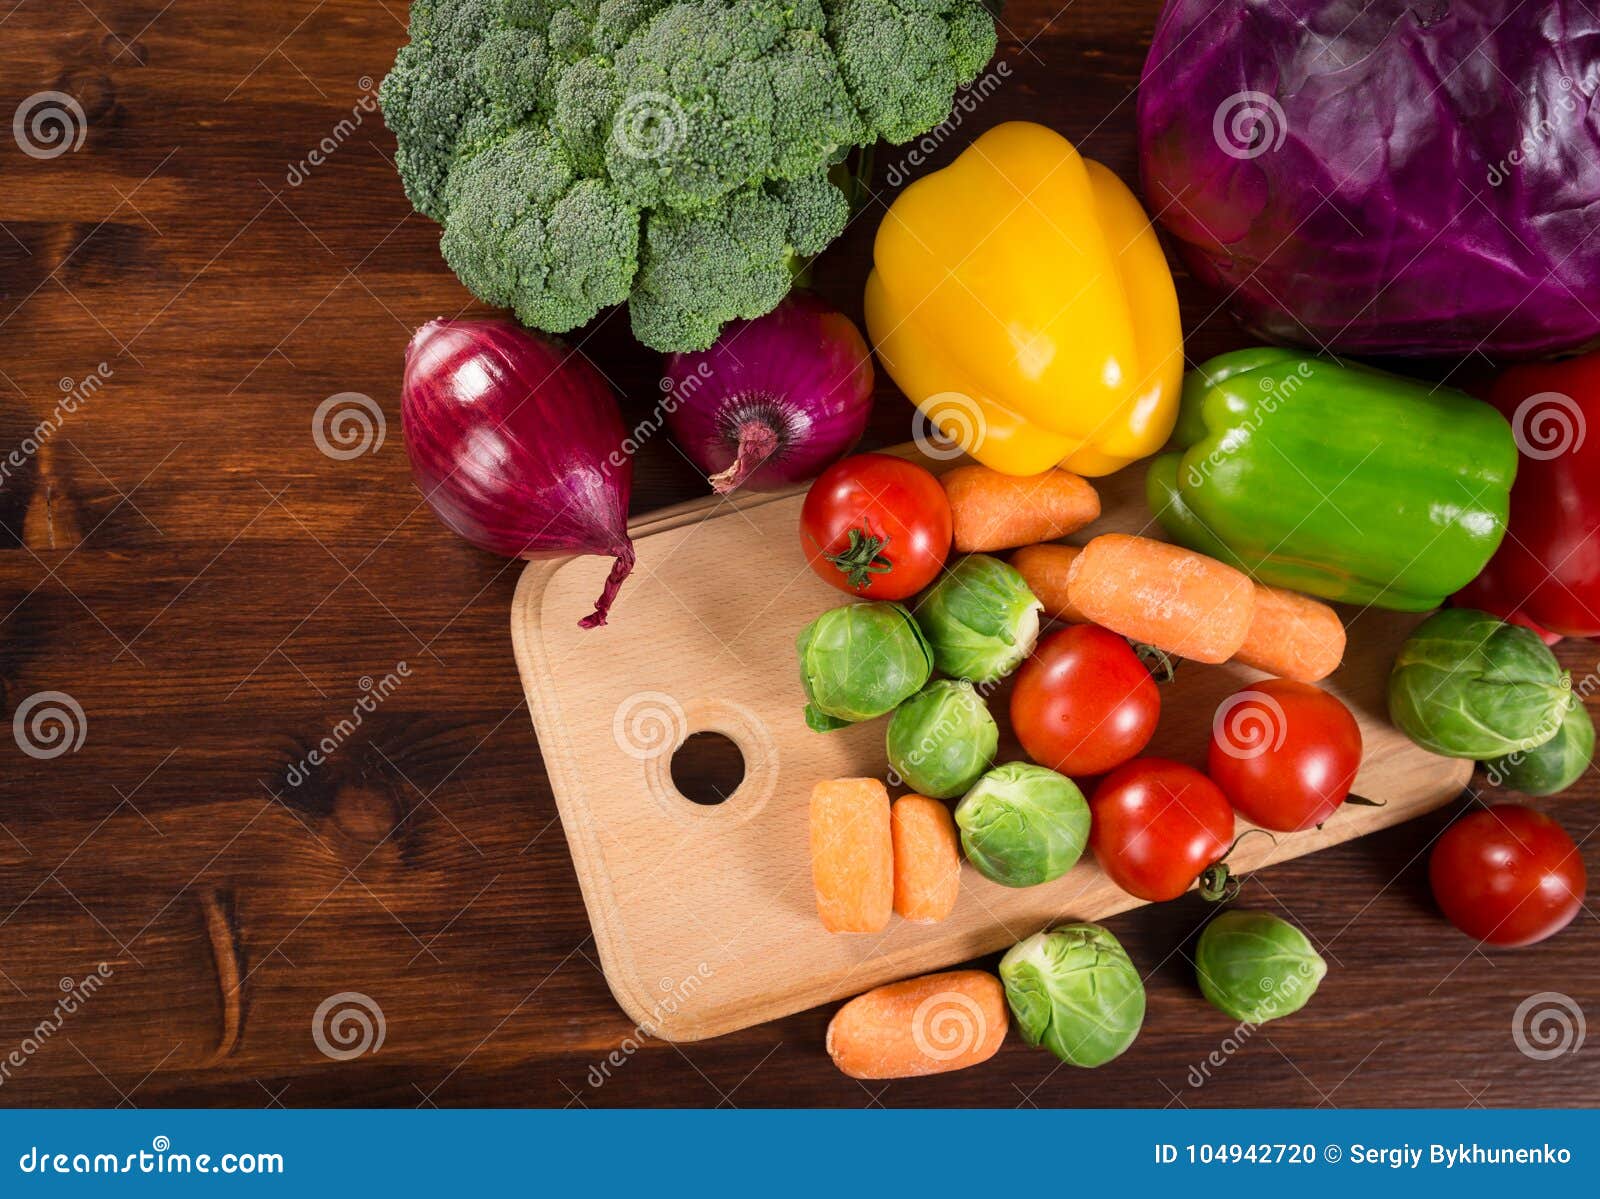 assortment of fresh vegetales on wooden table with copyspace